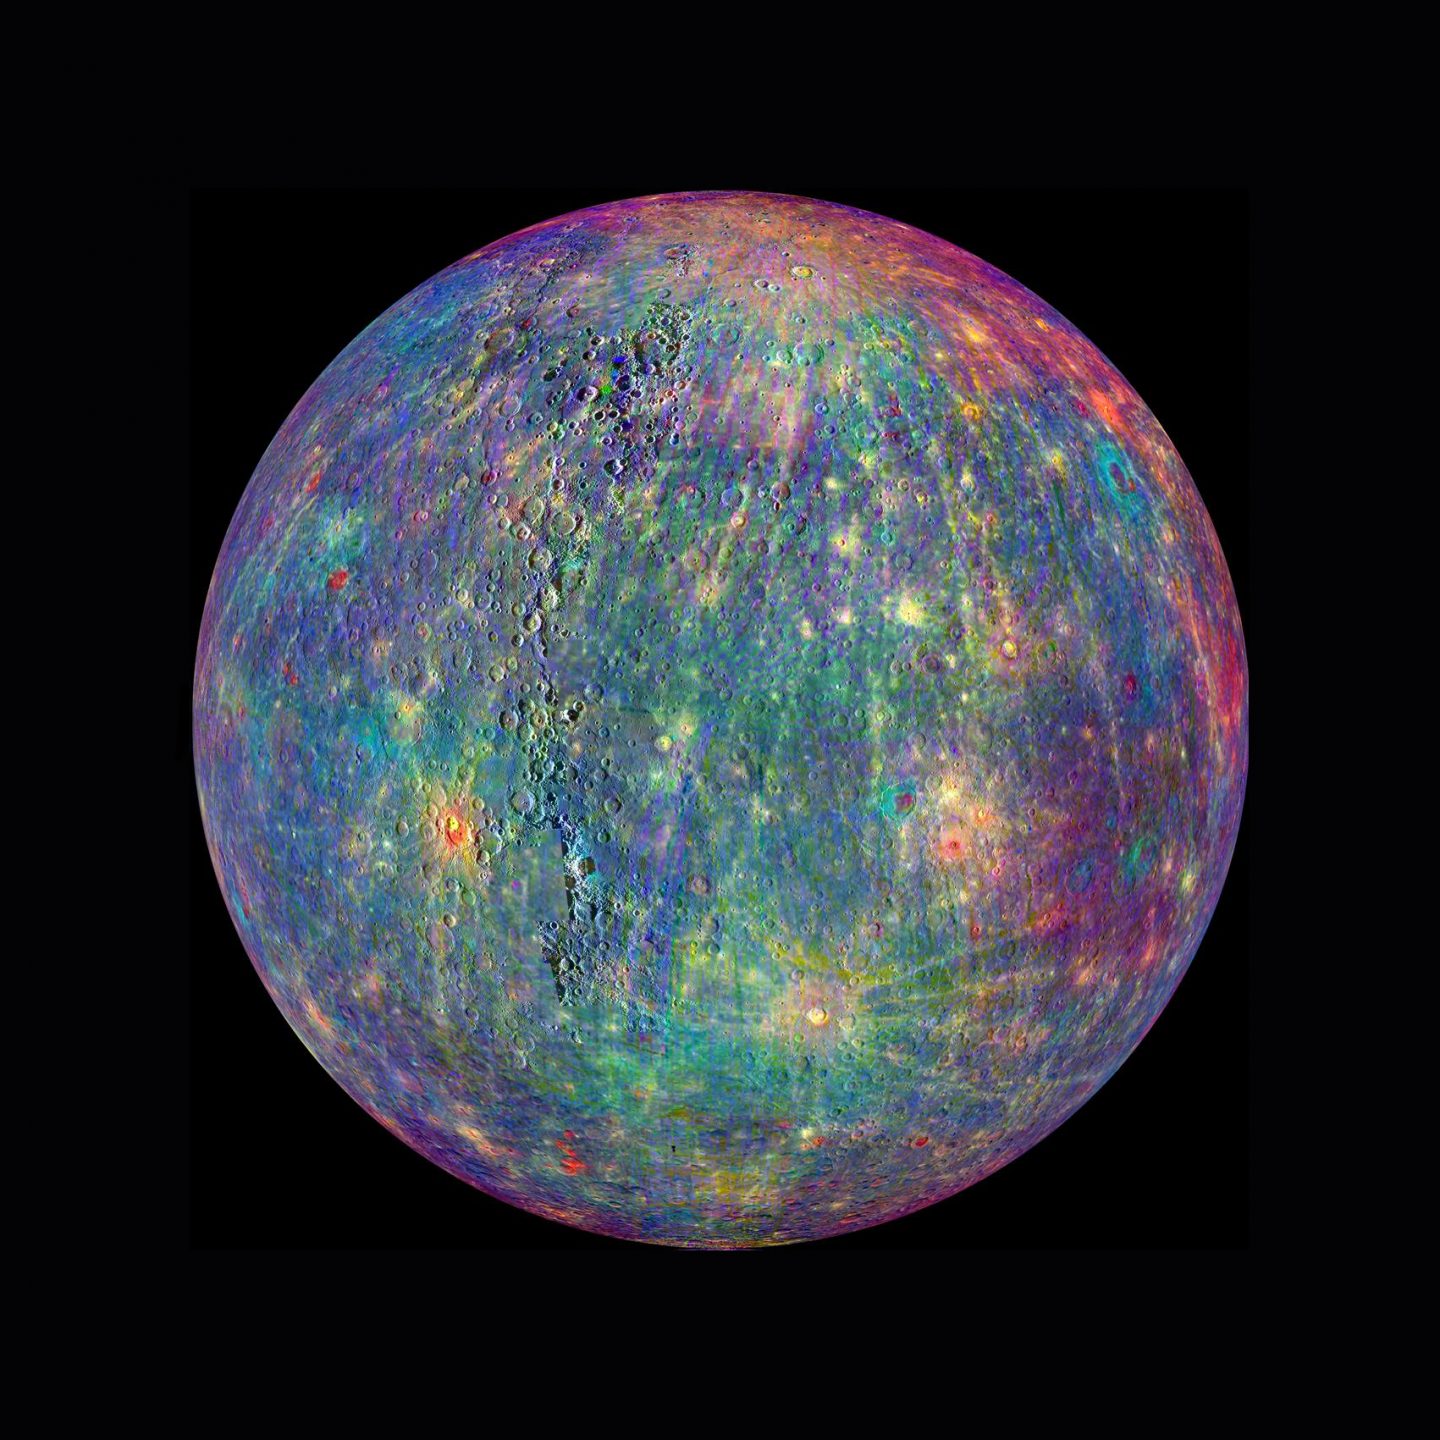 Different minerals appear in a rainbow of colors in this image of Mercury from NASA’s MESSENGER spacecraft.